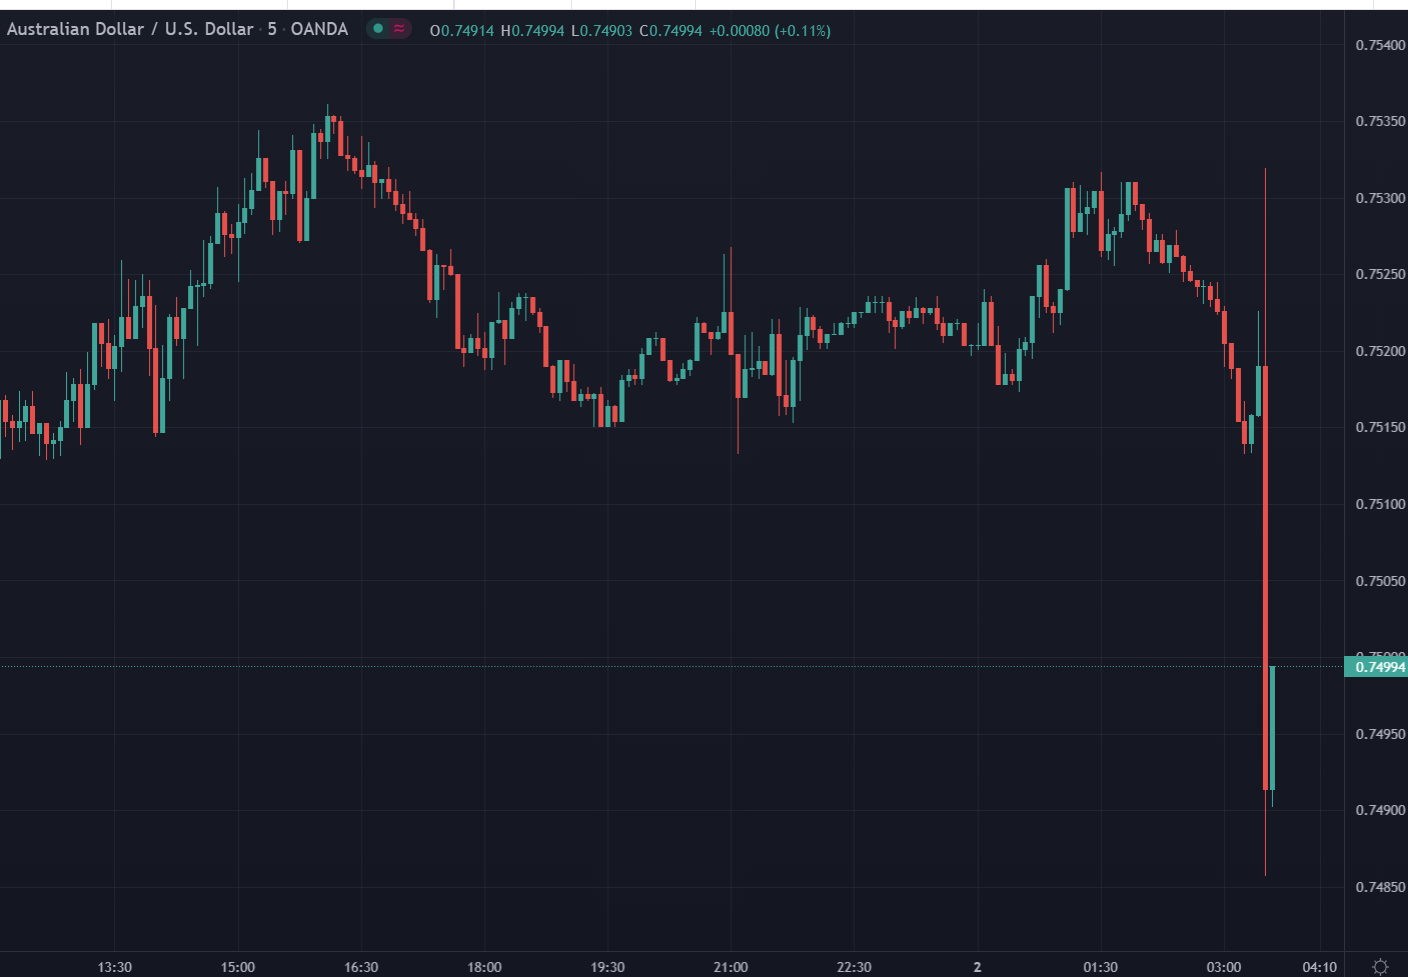 AUD/USD dropped under 0.7500 and is straddling there as I post. 